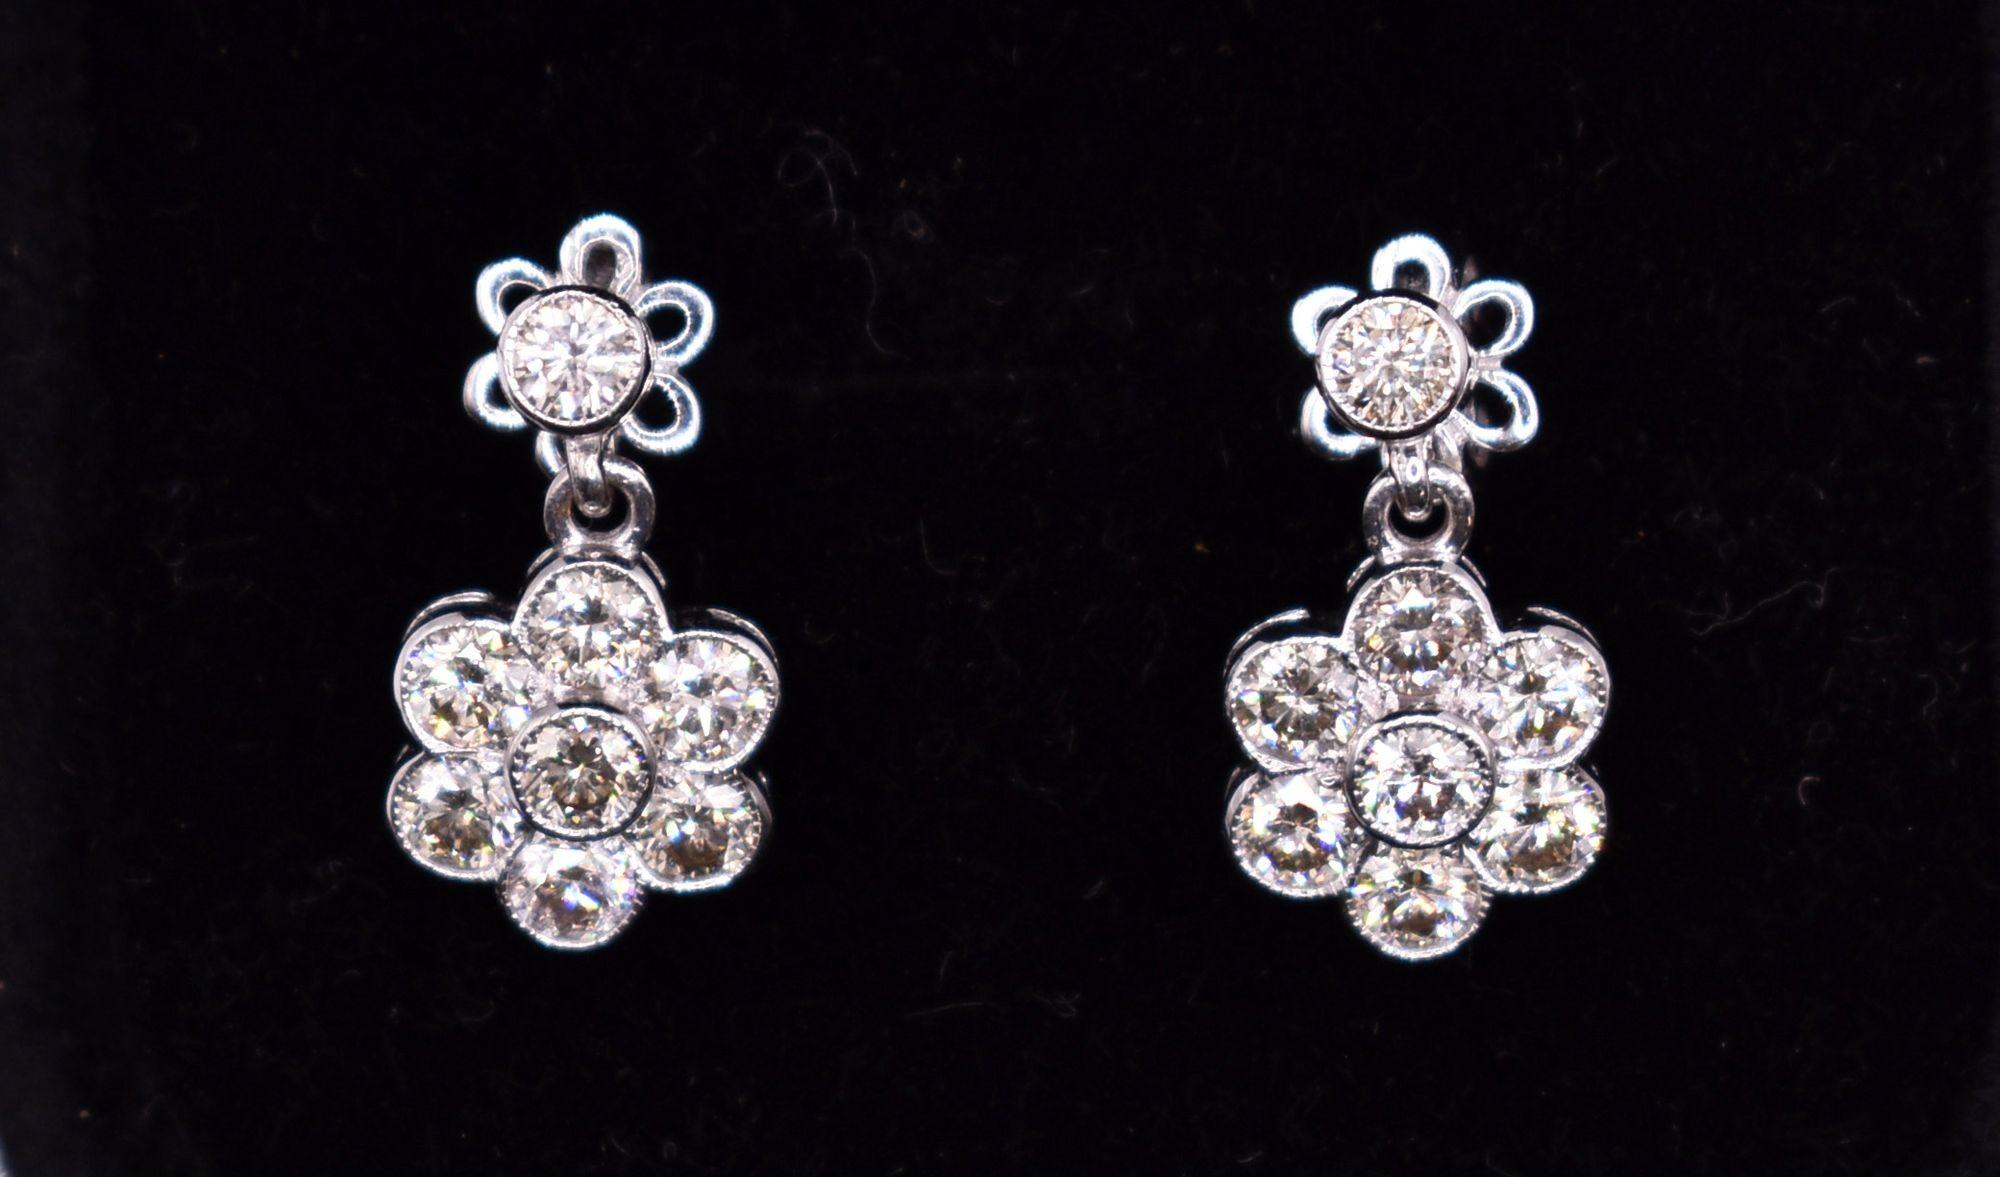 Pair of 18k White Gold 1.4ct Diamond Daisy Drop Earrings For Sale 3